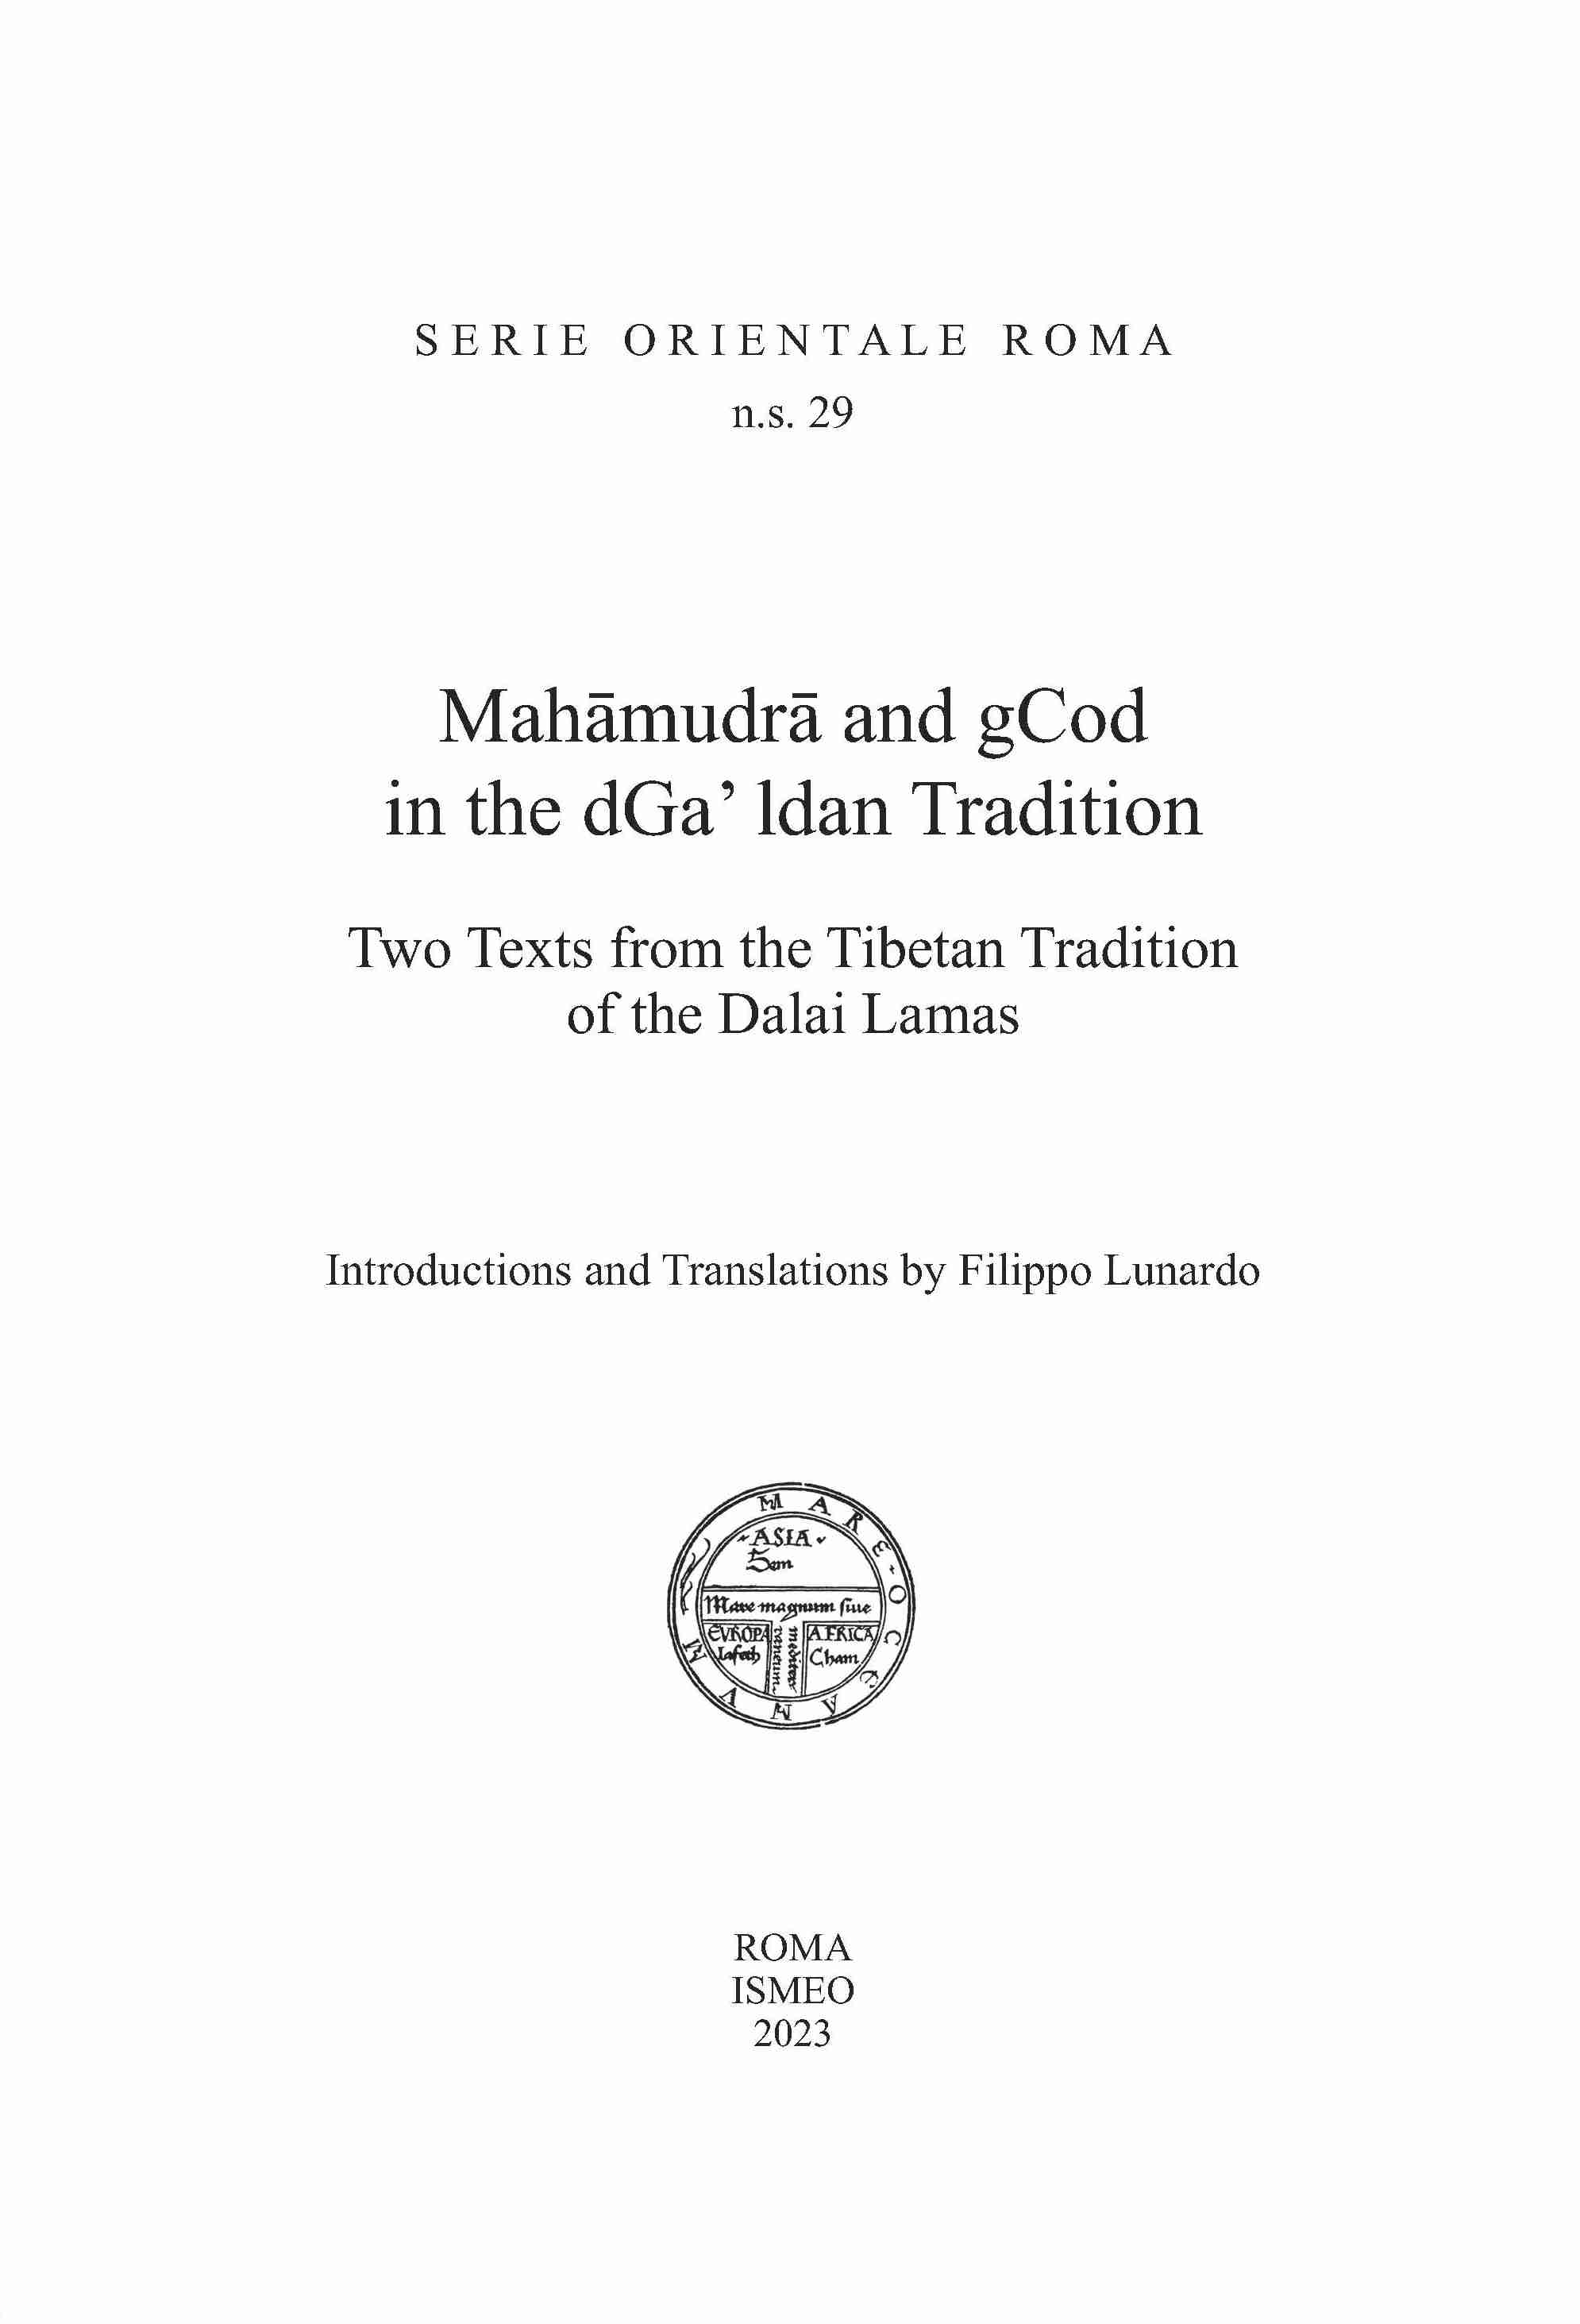 Mahamudra and gCod in the dGa’ ldan Tradition <br/>
Two Texts from the Tibetan Tradition of the Dalai Lamas <br/>
Introductions and Translations by Filippo Lunardo - SERIE ORIENTALE ROMA n.s. 29 
